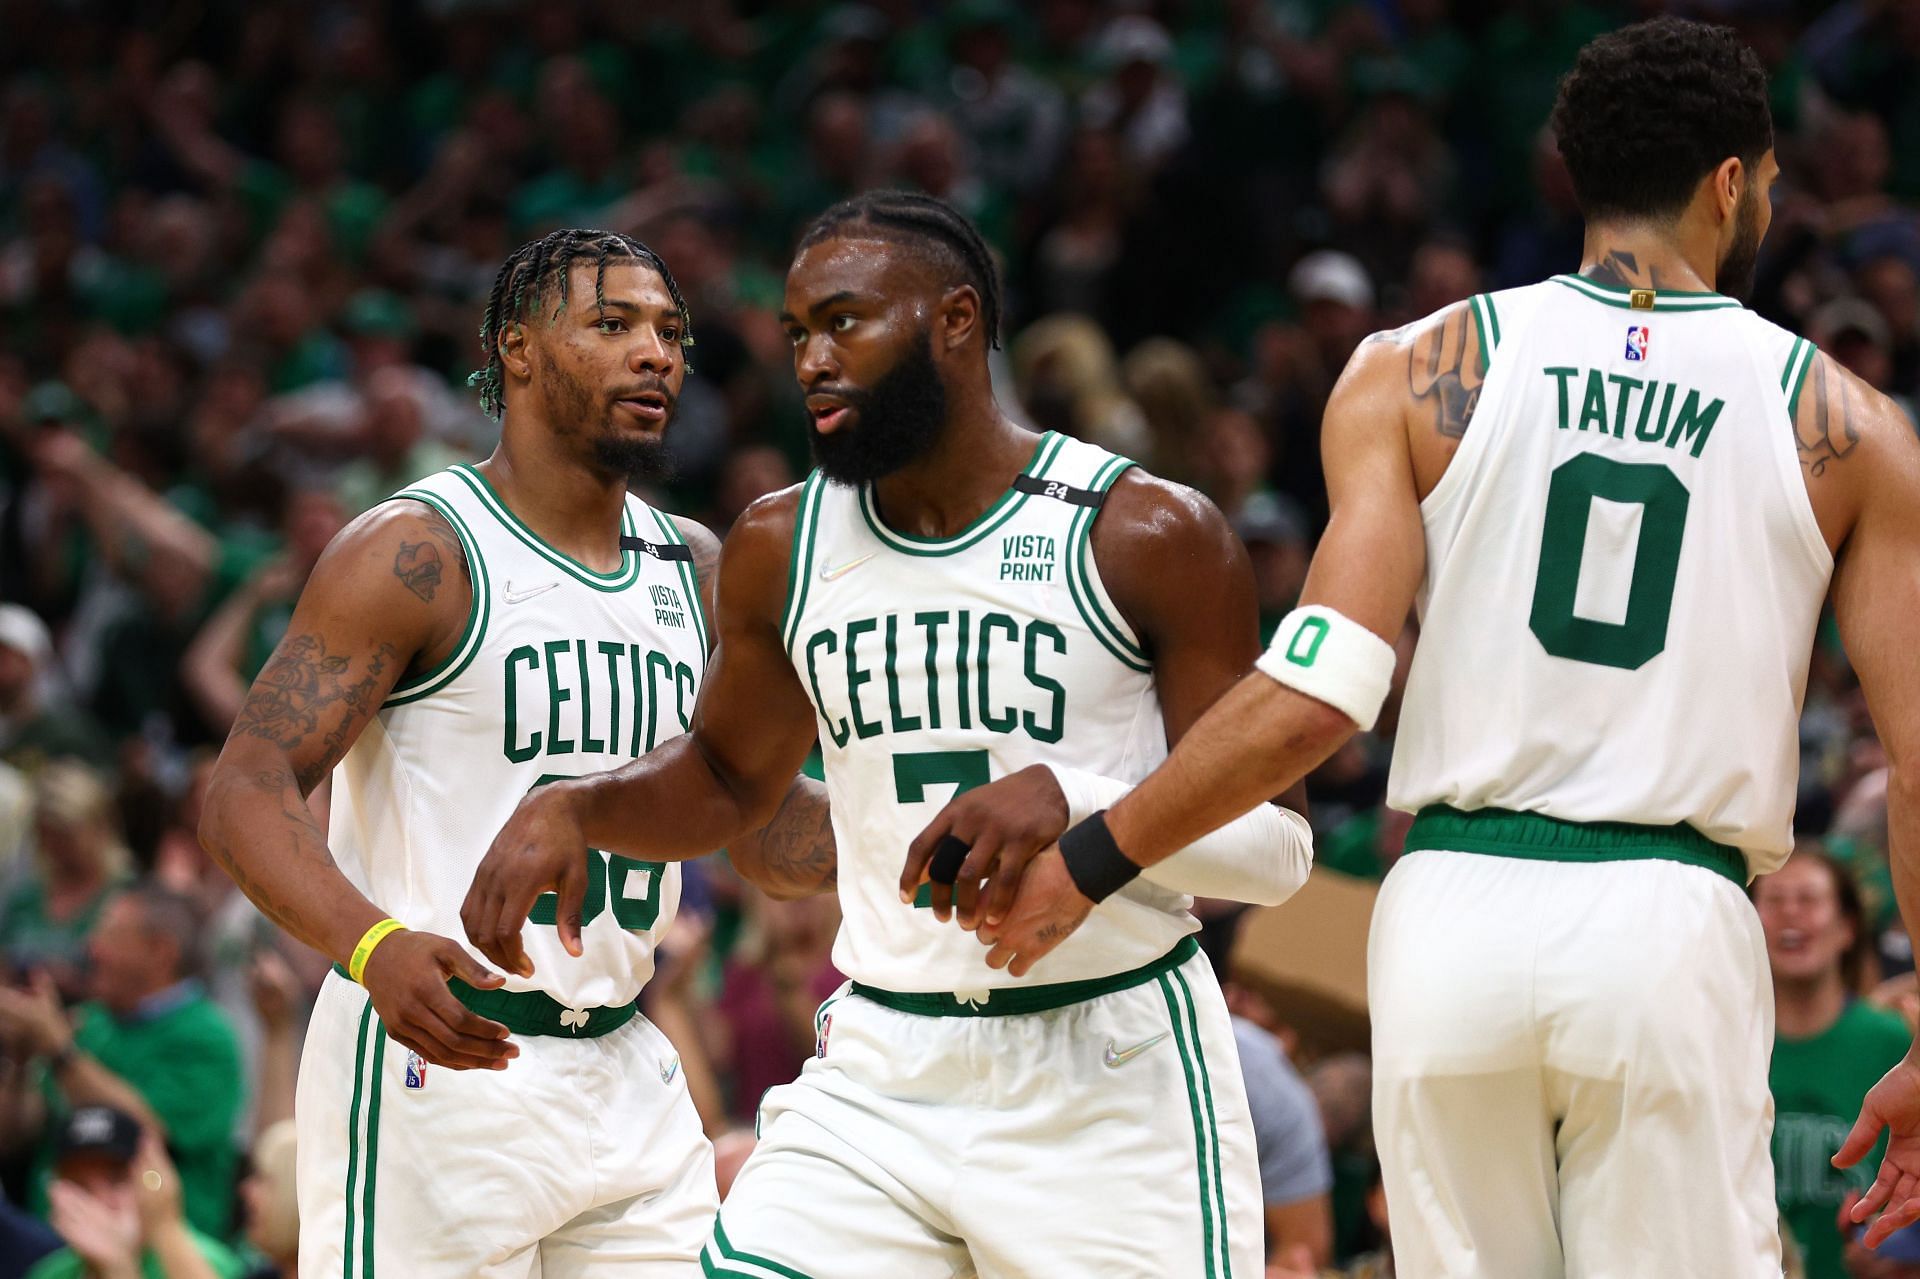 Marcus Smart, Jaylen Brown and Jayson Tatum had 17 of the 24 Boston Celtics turnovers in Game 3